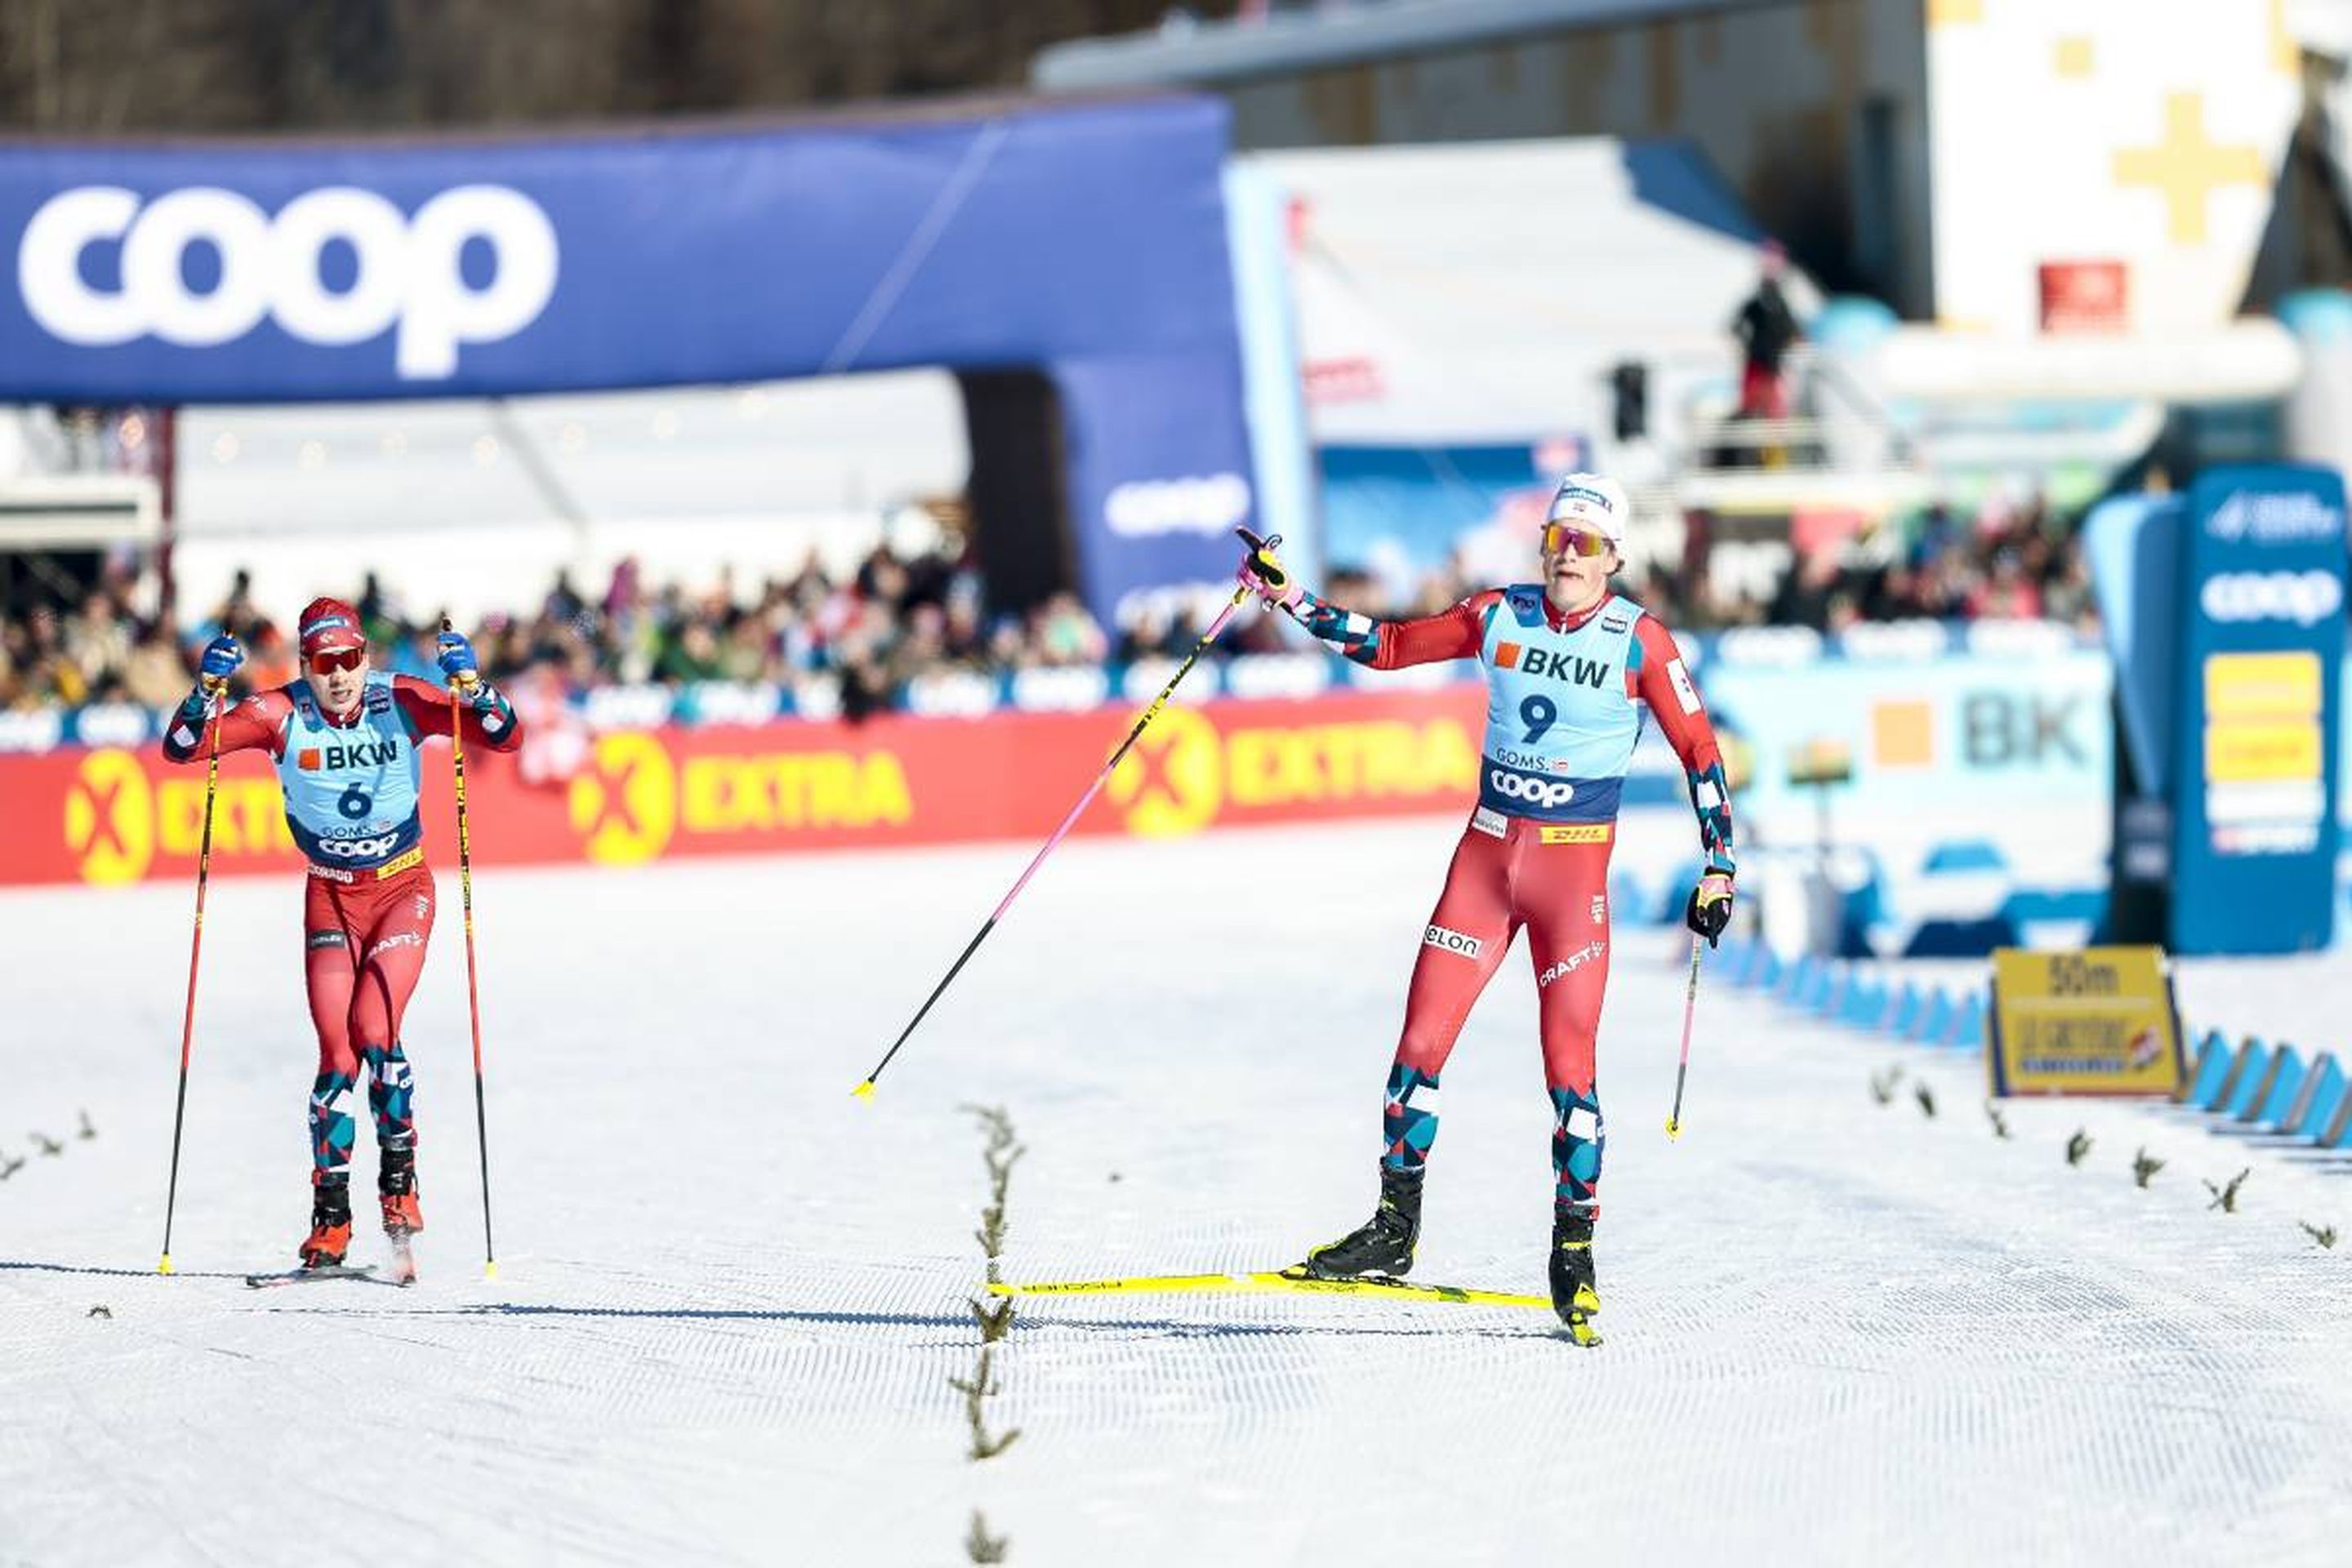 Simen Hegstad Krueger (left) watches on as Johannes Hoesflot Klaebo (right) celebrates his victory before crossing the finish line © NordicFocus